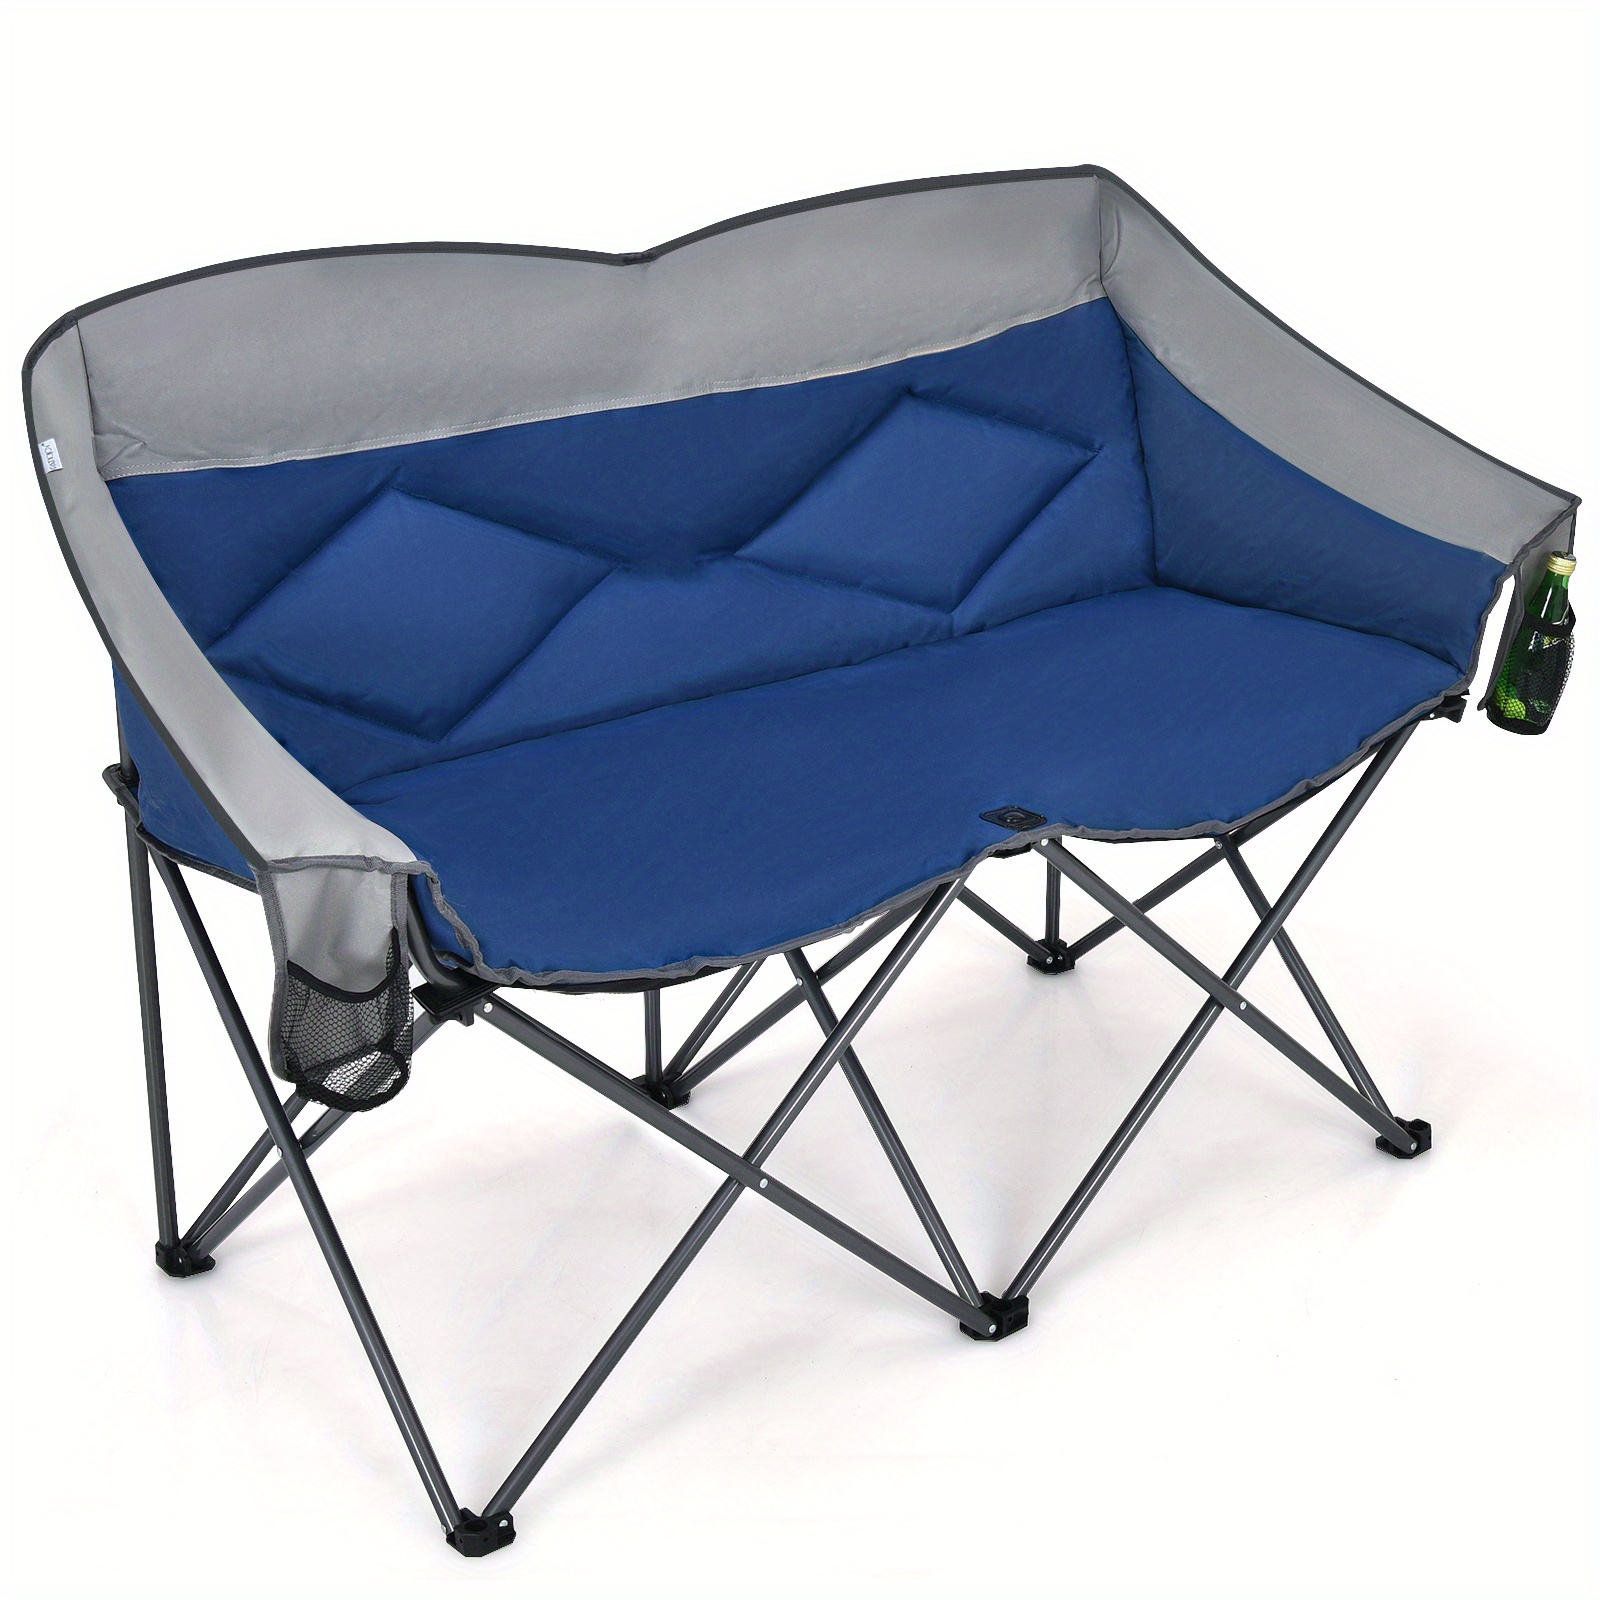 

Lifezeal Folding Camping Chair Loveseat Double Seat W/ Bags & Padded Backrest